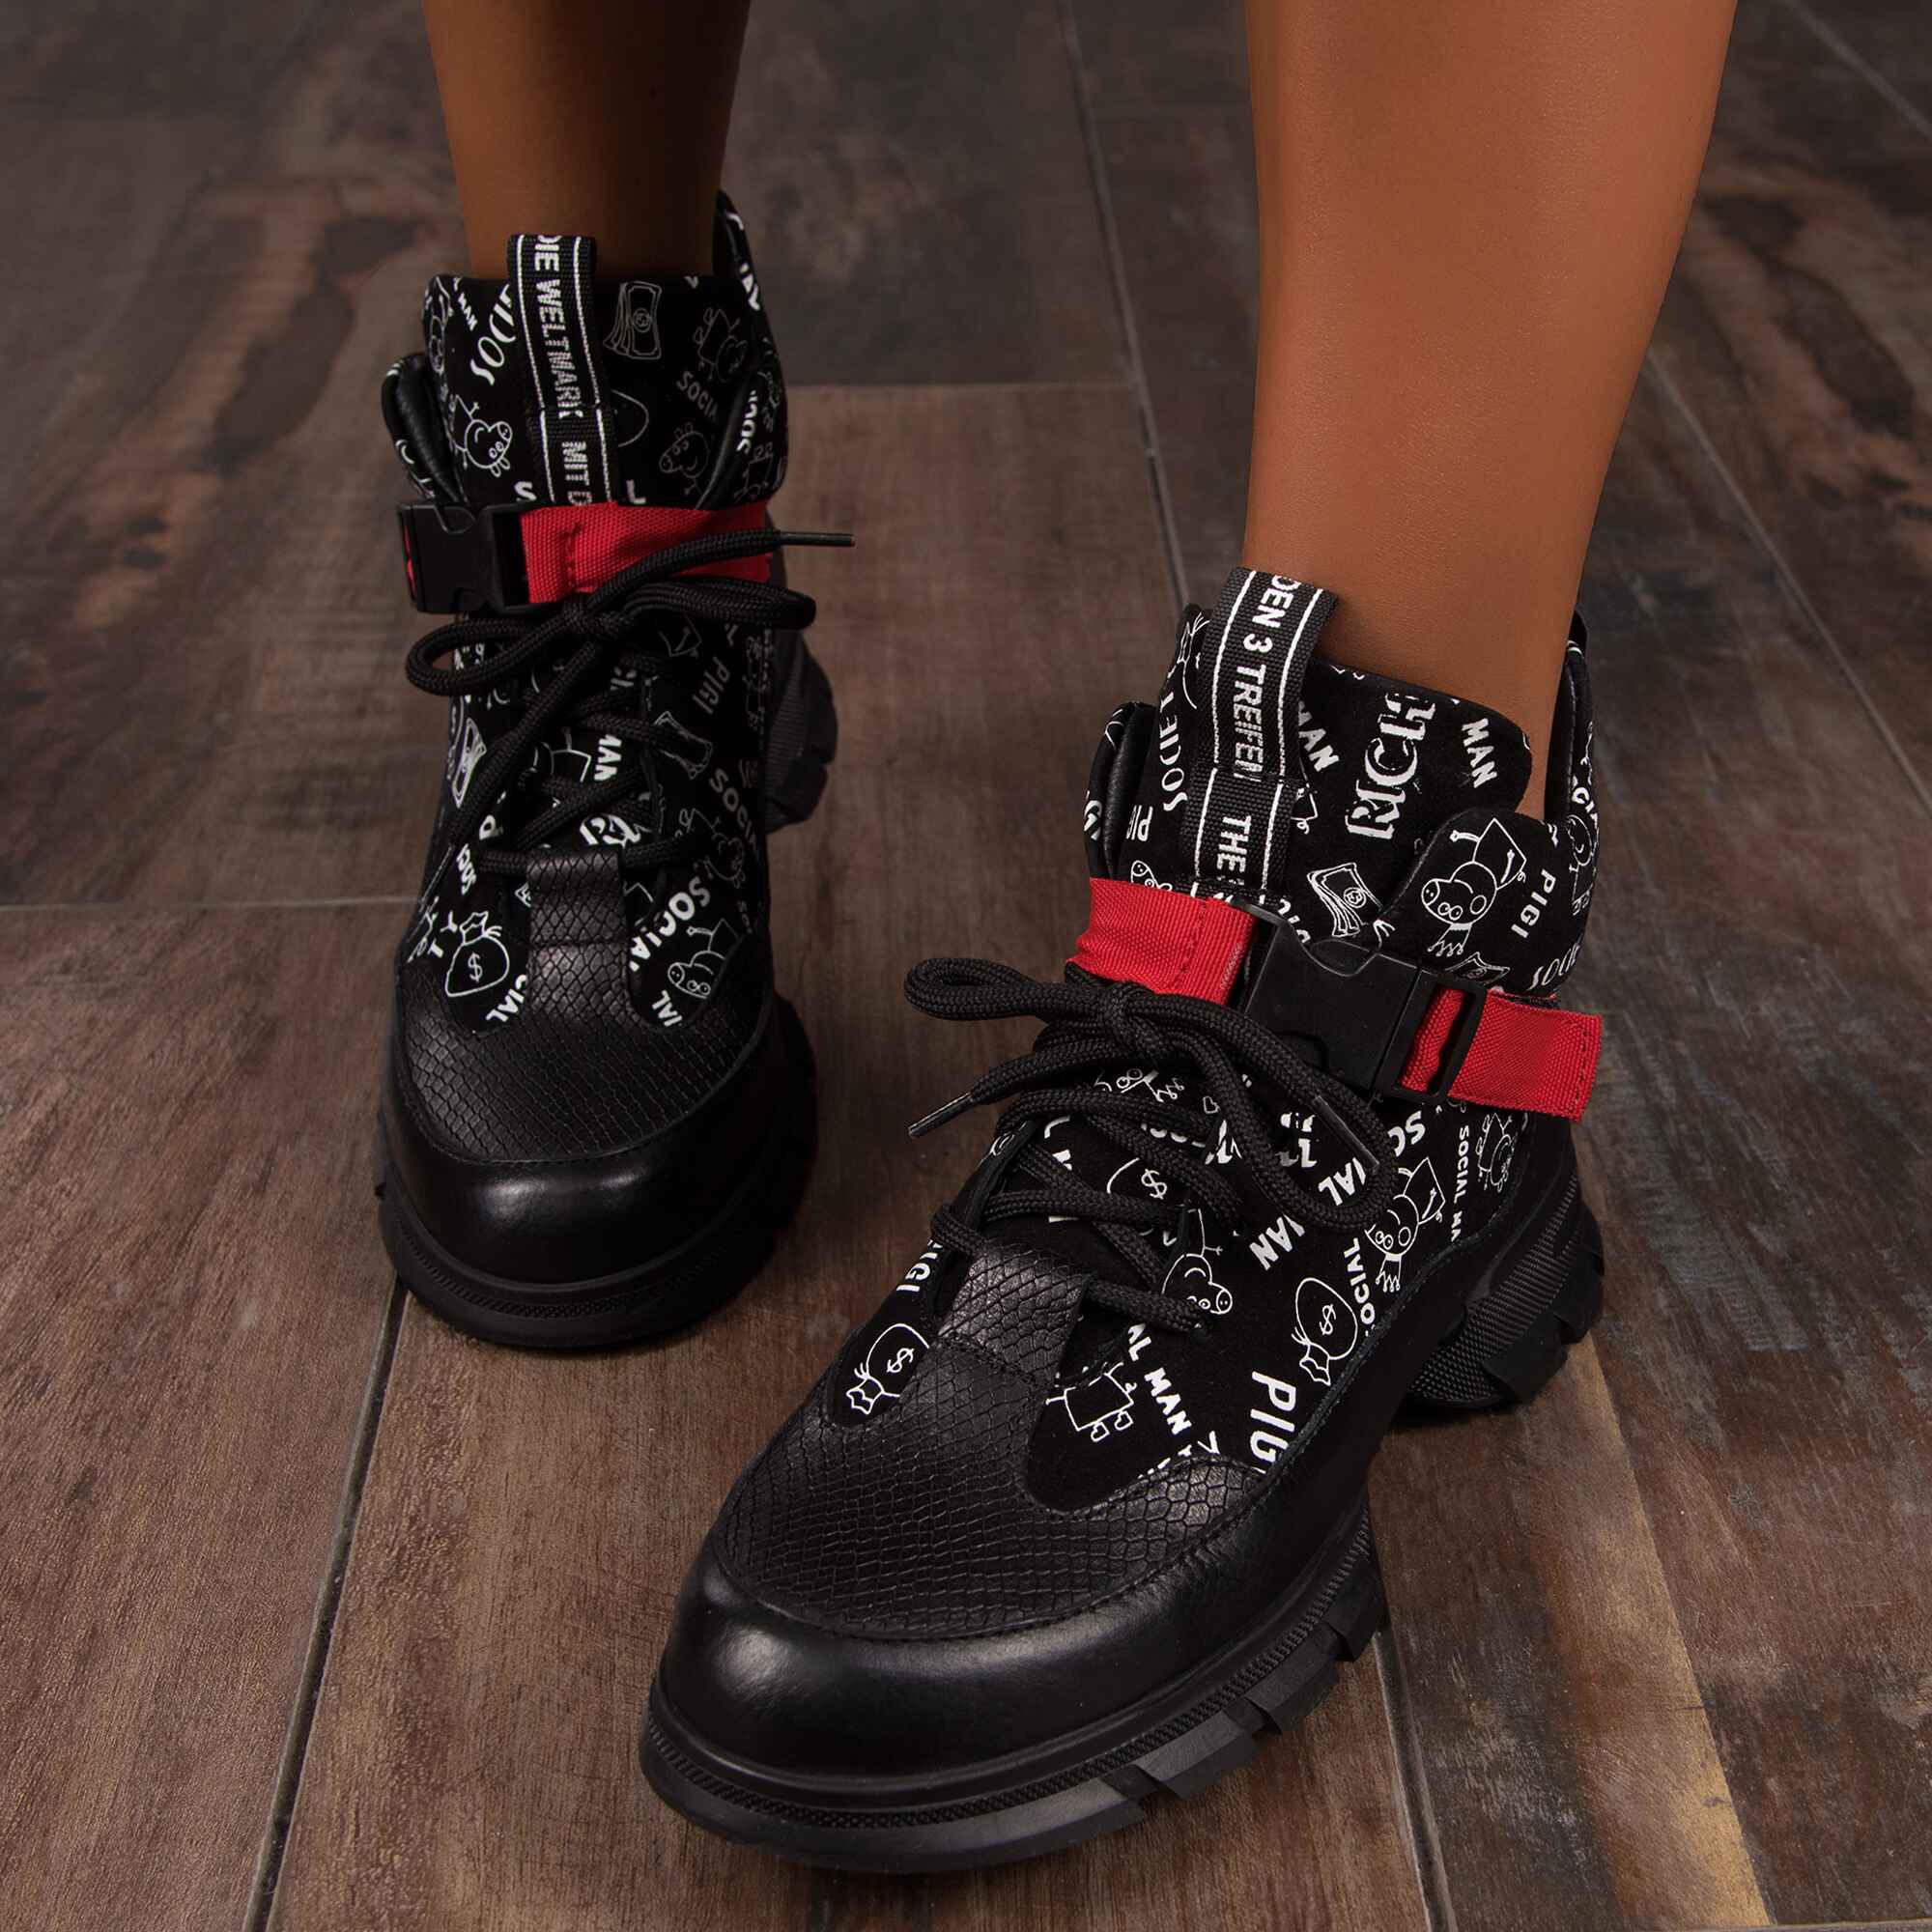 Offbeat Graphic Ankle Boots, Black Color